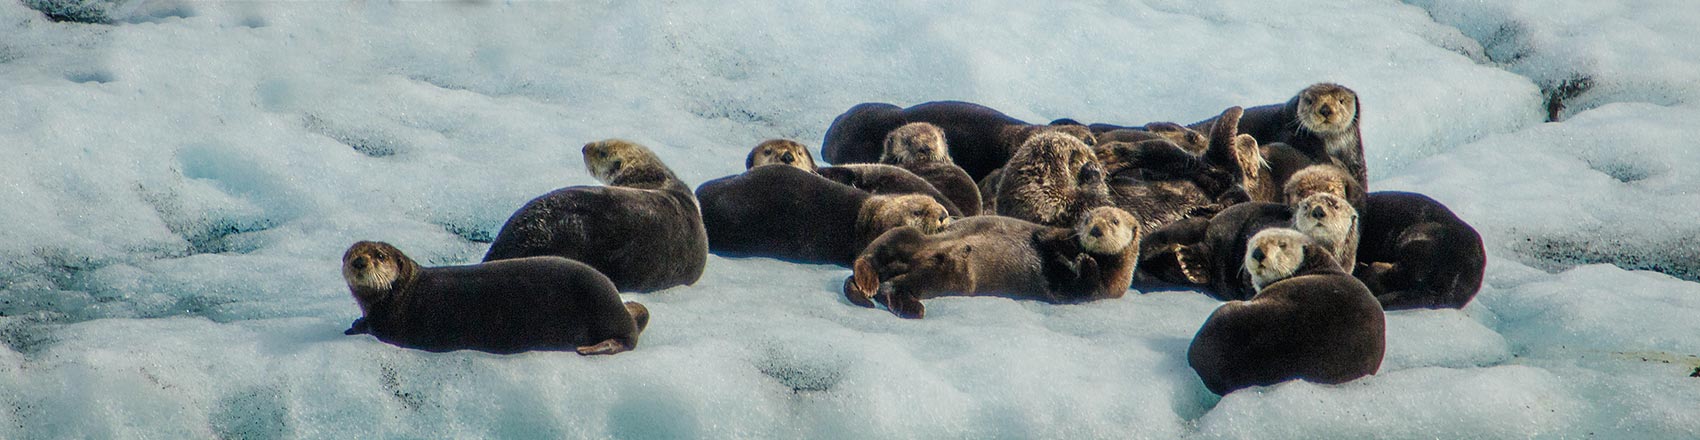 Several sea otters hauled out onto an iceberg.